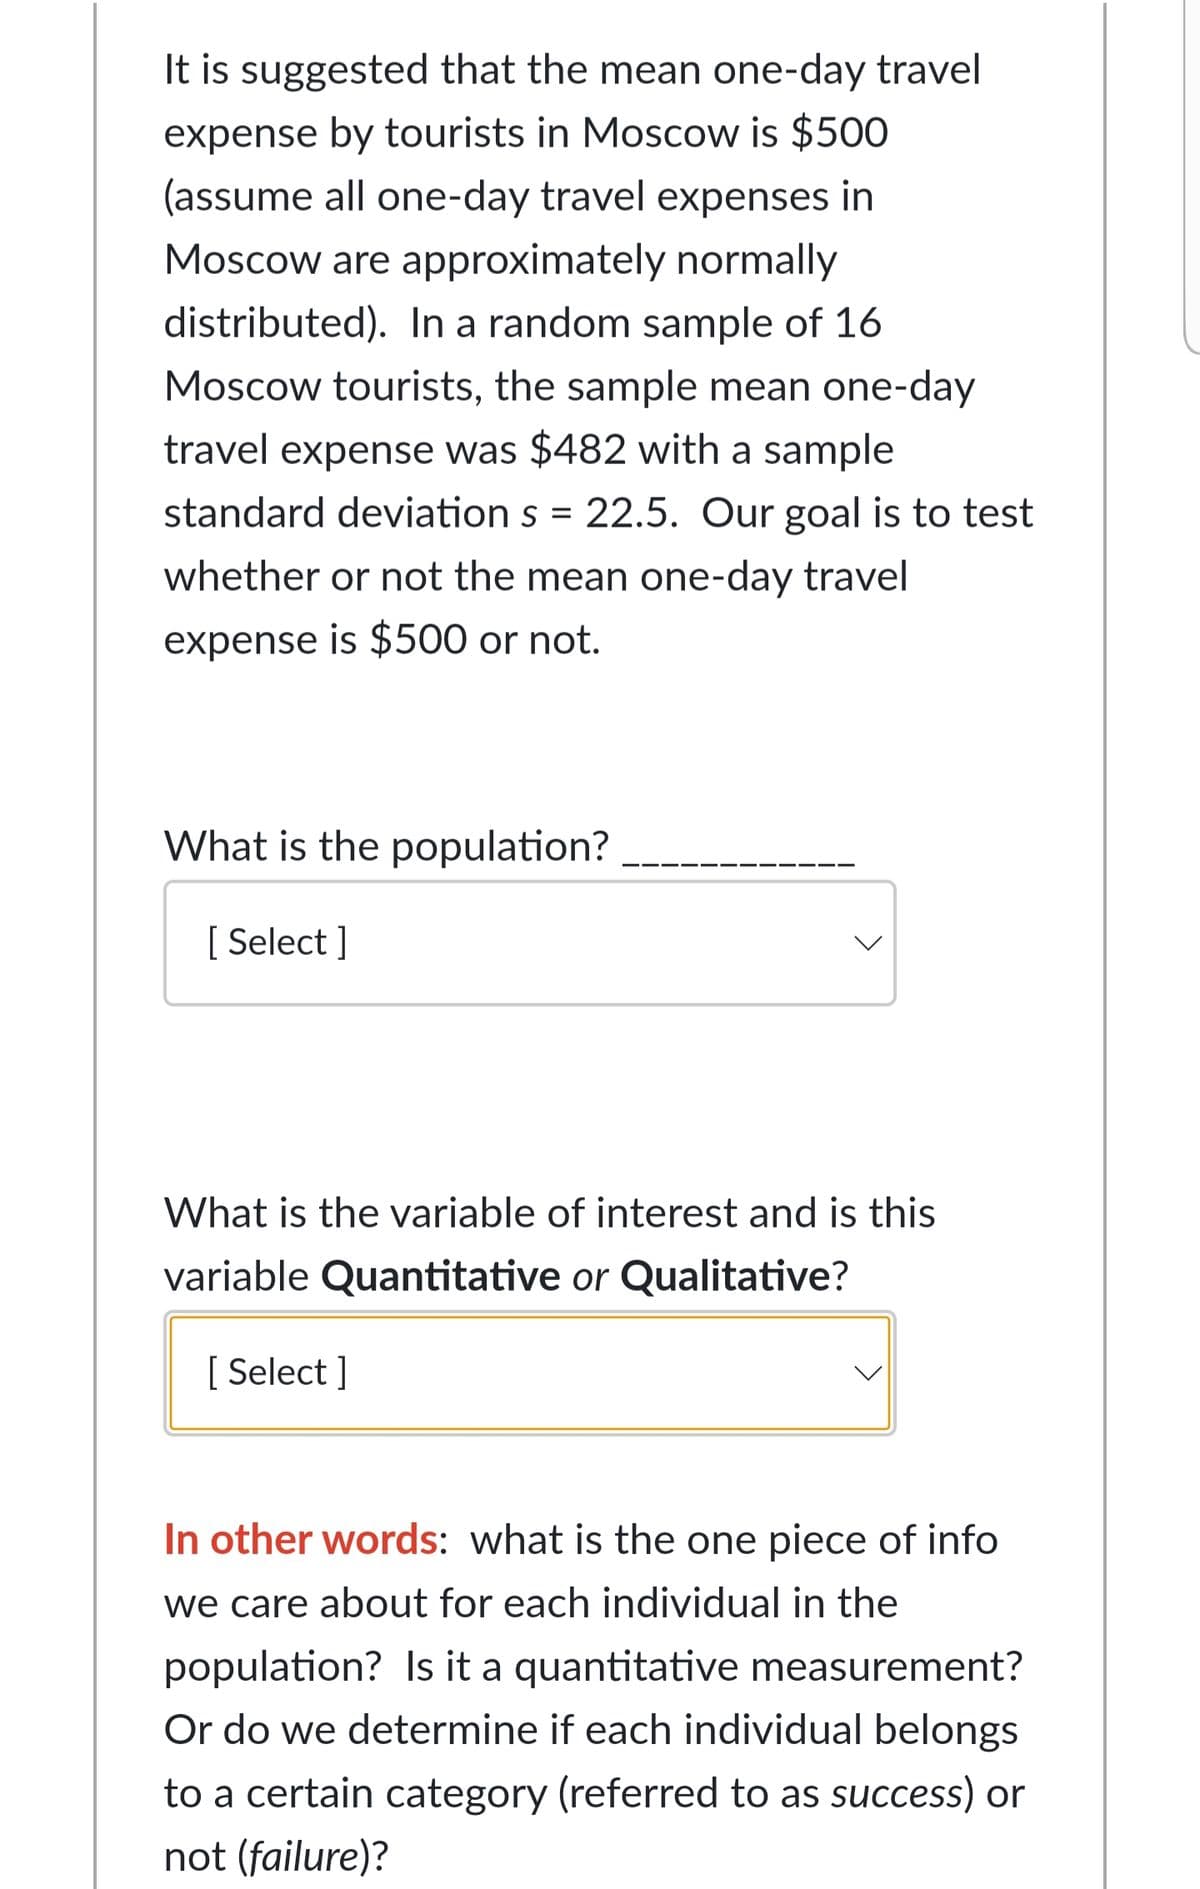 It is suggested that the mean one-day travel
expense by tourists in Moscow is $500
(assume all one-day travel expenses in
Moscow are approximately normally
distributed). In a random sample of 16
Moscow tourists, the sample mean one-day
travel expense was $482 with a sample
standard deviation s = 22.5. Our goal is to test
whether or not the mean one-day travel
expense is $500 or not.
What is the population?
[ Select ]
What is the variable of interest and is this
variable Quantitative or Qualitative?
[ Select ]
In other words: what is the one piece of info
we care about for each individual in the
population? Is it a quantitative measurement?
Or do we determine if each individual belongs
to a certain category (referred to as success) or
not (failure)?
